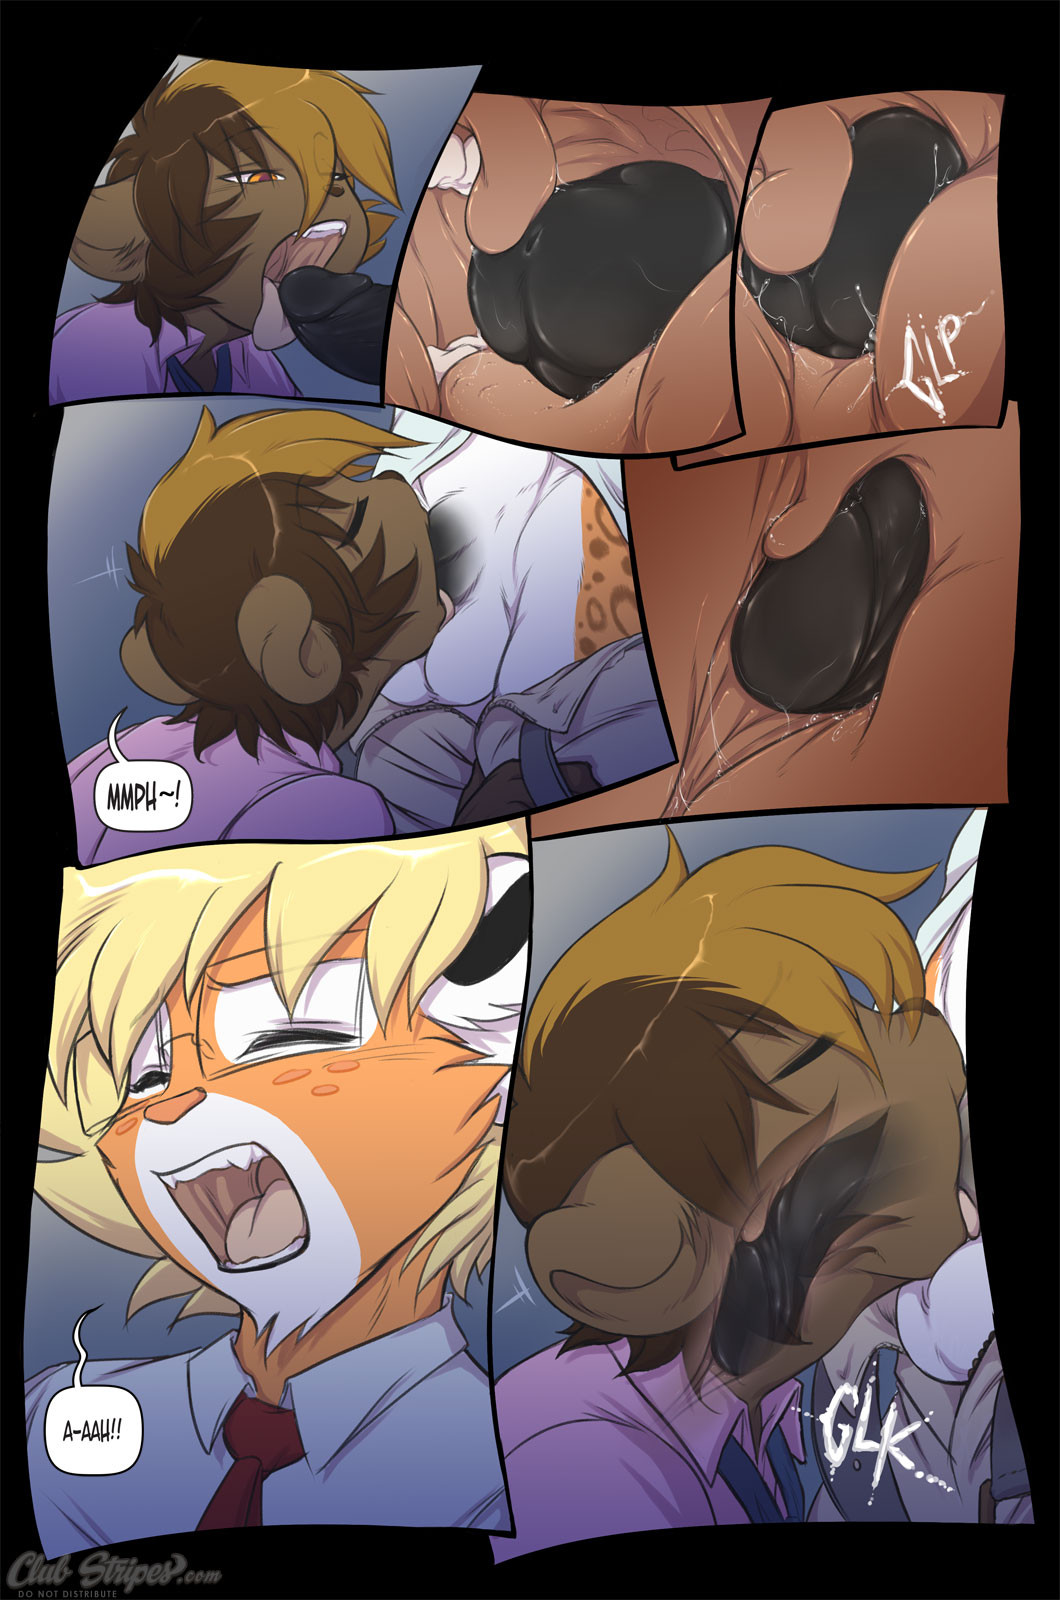 Hardcore Gay Furry Porn - gay furry pics - Page 10 - HentaiEra